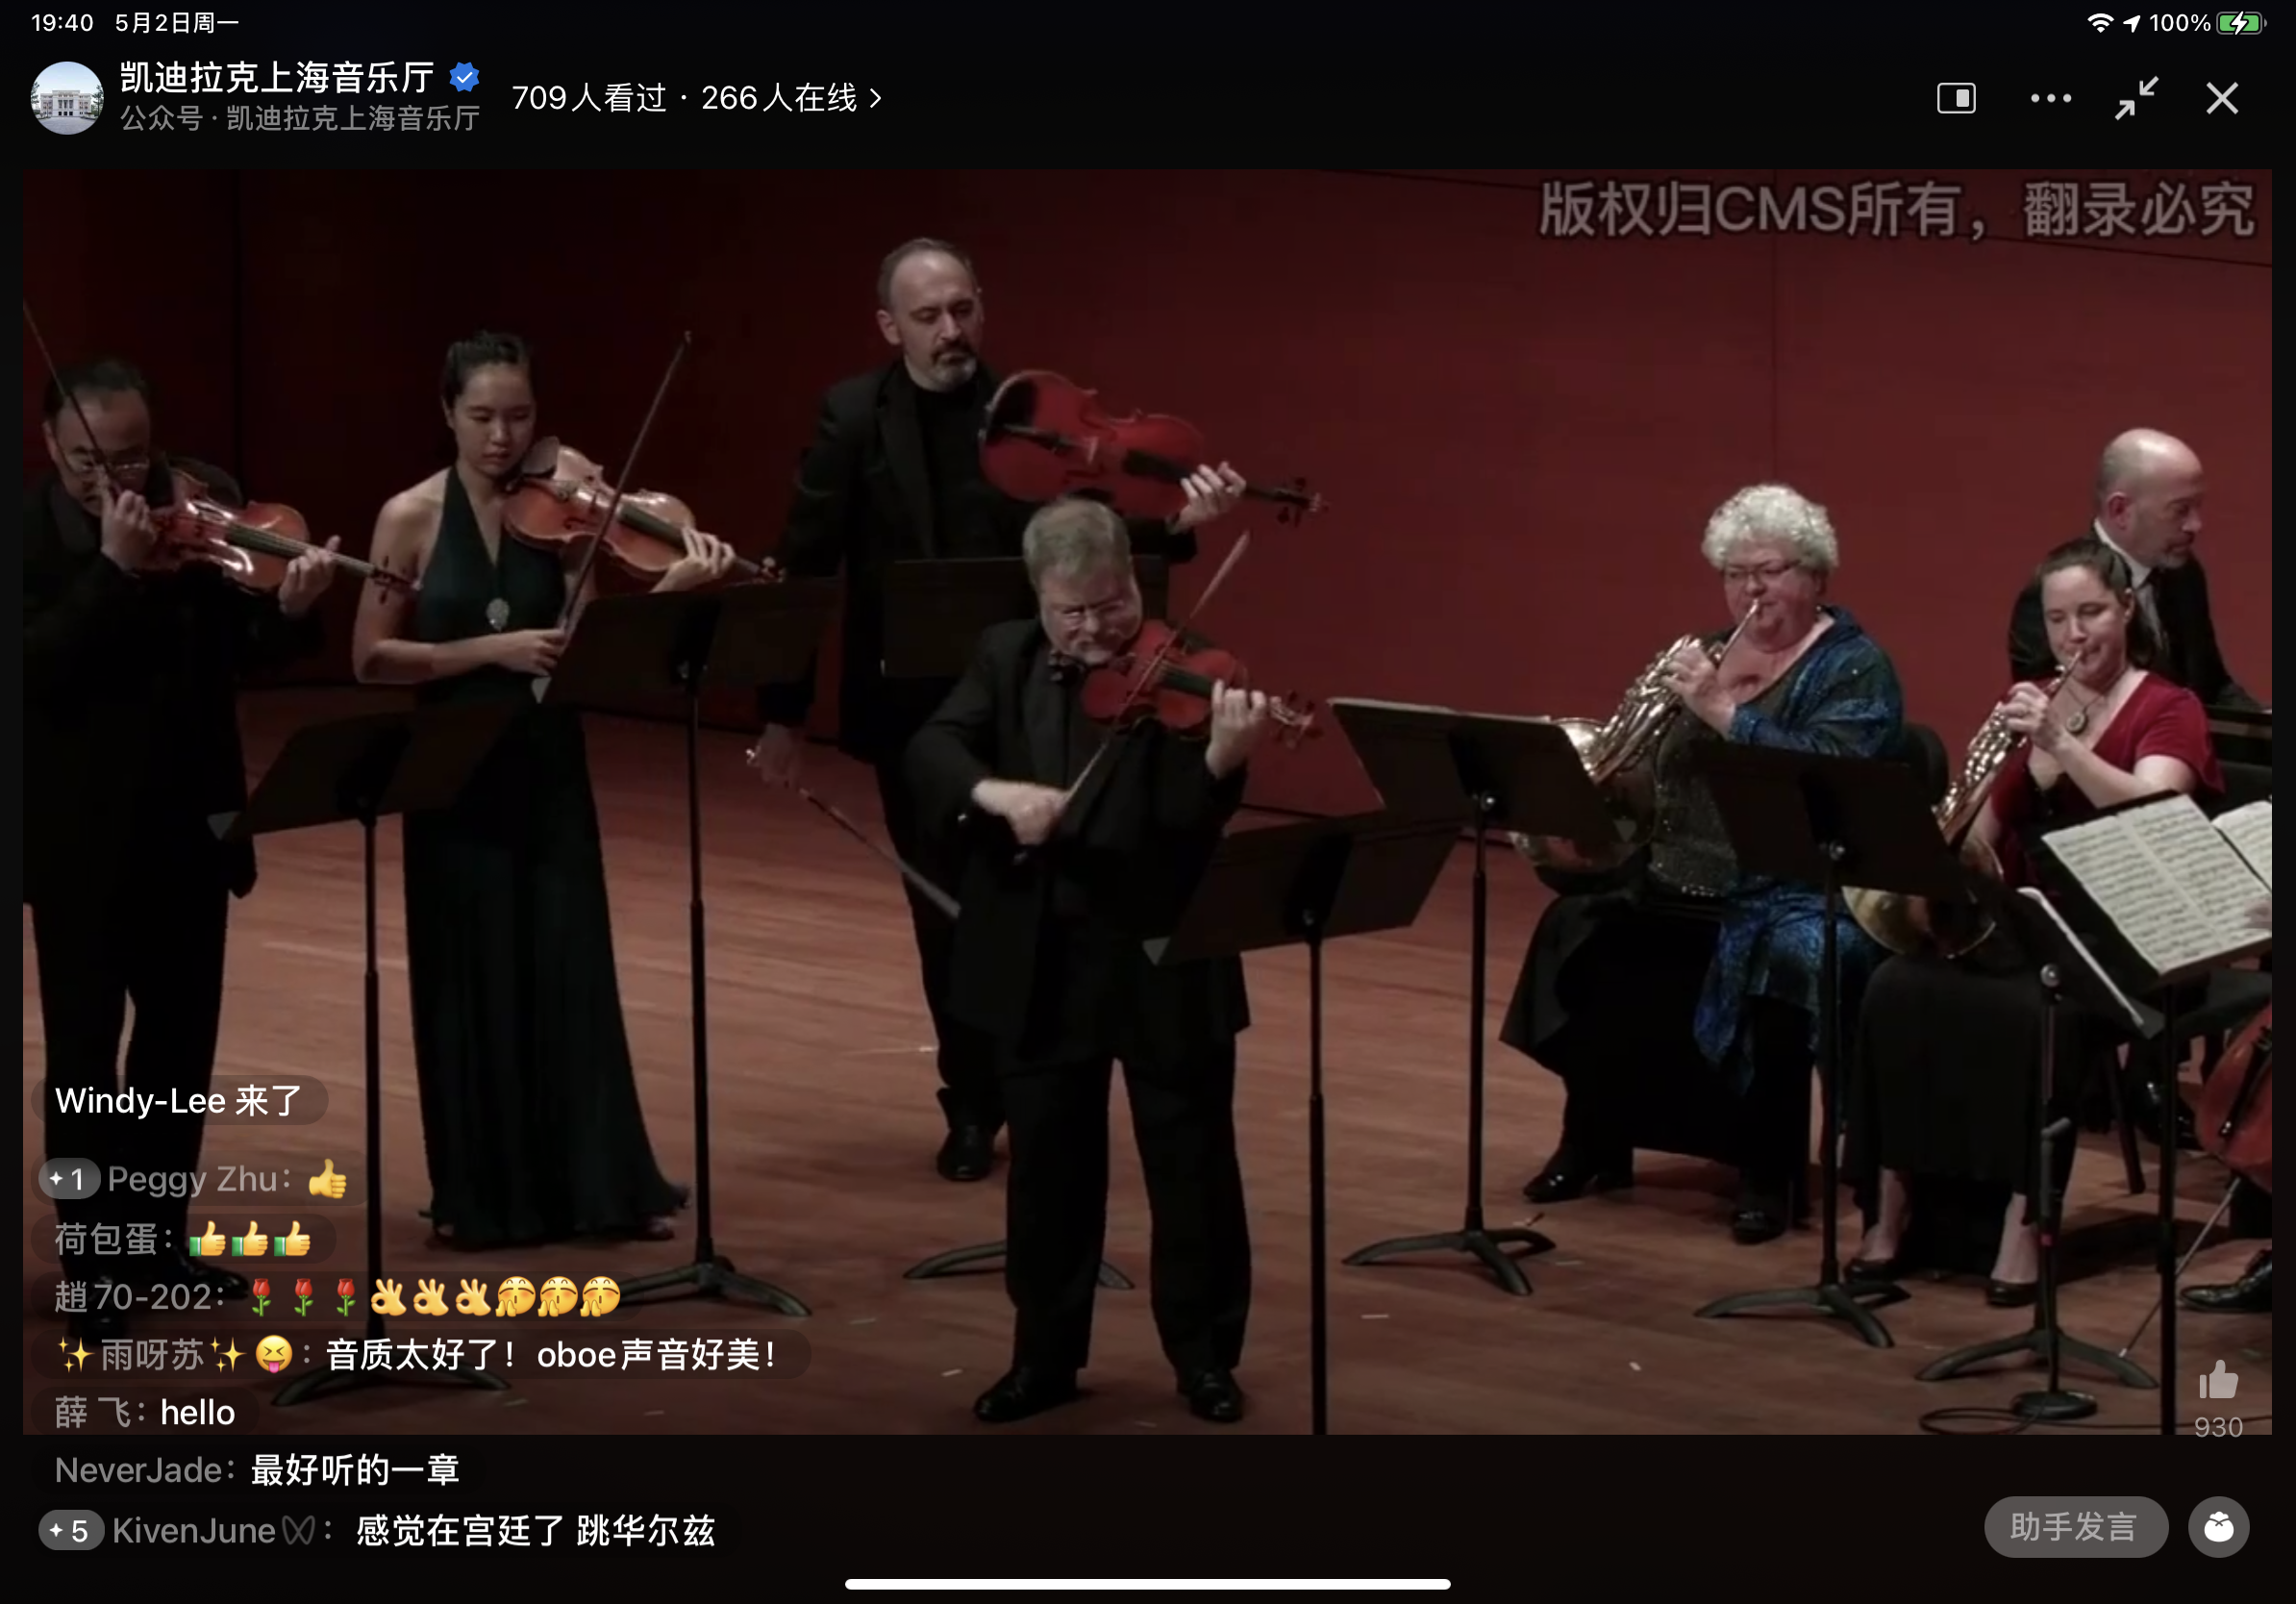 The Shanghai Concert Hall broadcasted 4 concerts from the Chamber Music Society of Lincoln Center (CMS) in New York. Several large characters were clearly printed on the broadcast page: Copyright belongs to CMS, and reprinting must be investigated